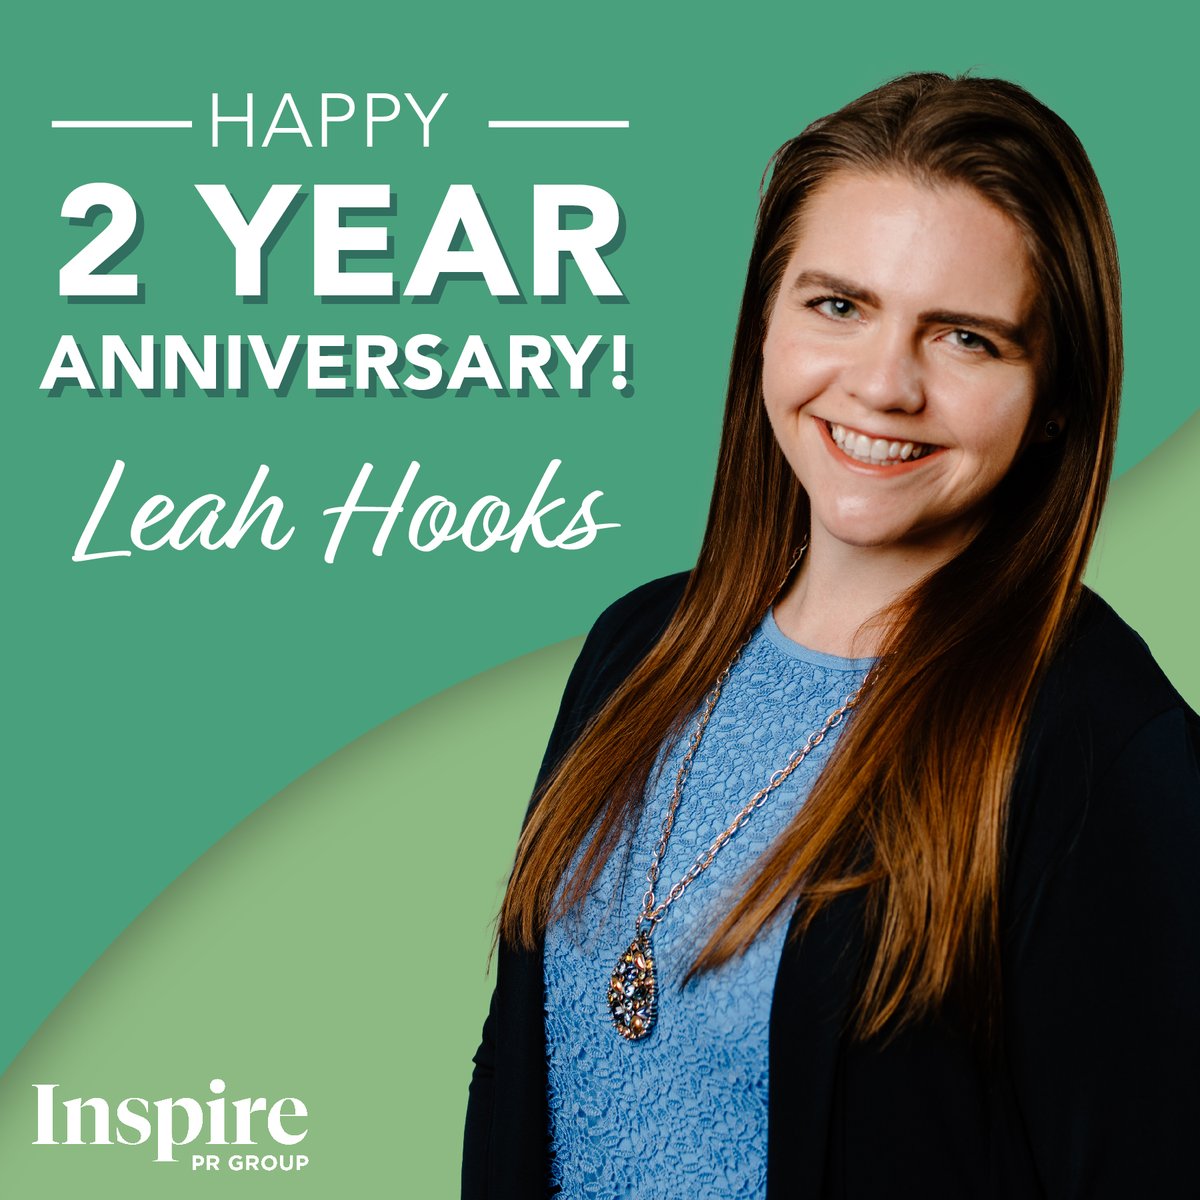 Leah Hooks joined Inspire 2️⃣ years ago! 👏 Leah is the go-to for all things website and #GoogleAds strategy. Her guidance throughout the switch to Google Analytics 4 (#GA4) has been vital. So thankful to have @LeahRachelHooks' skills + expertise! inspireprgroup.com/about/team/lea…